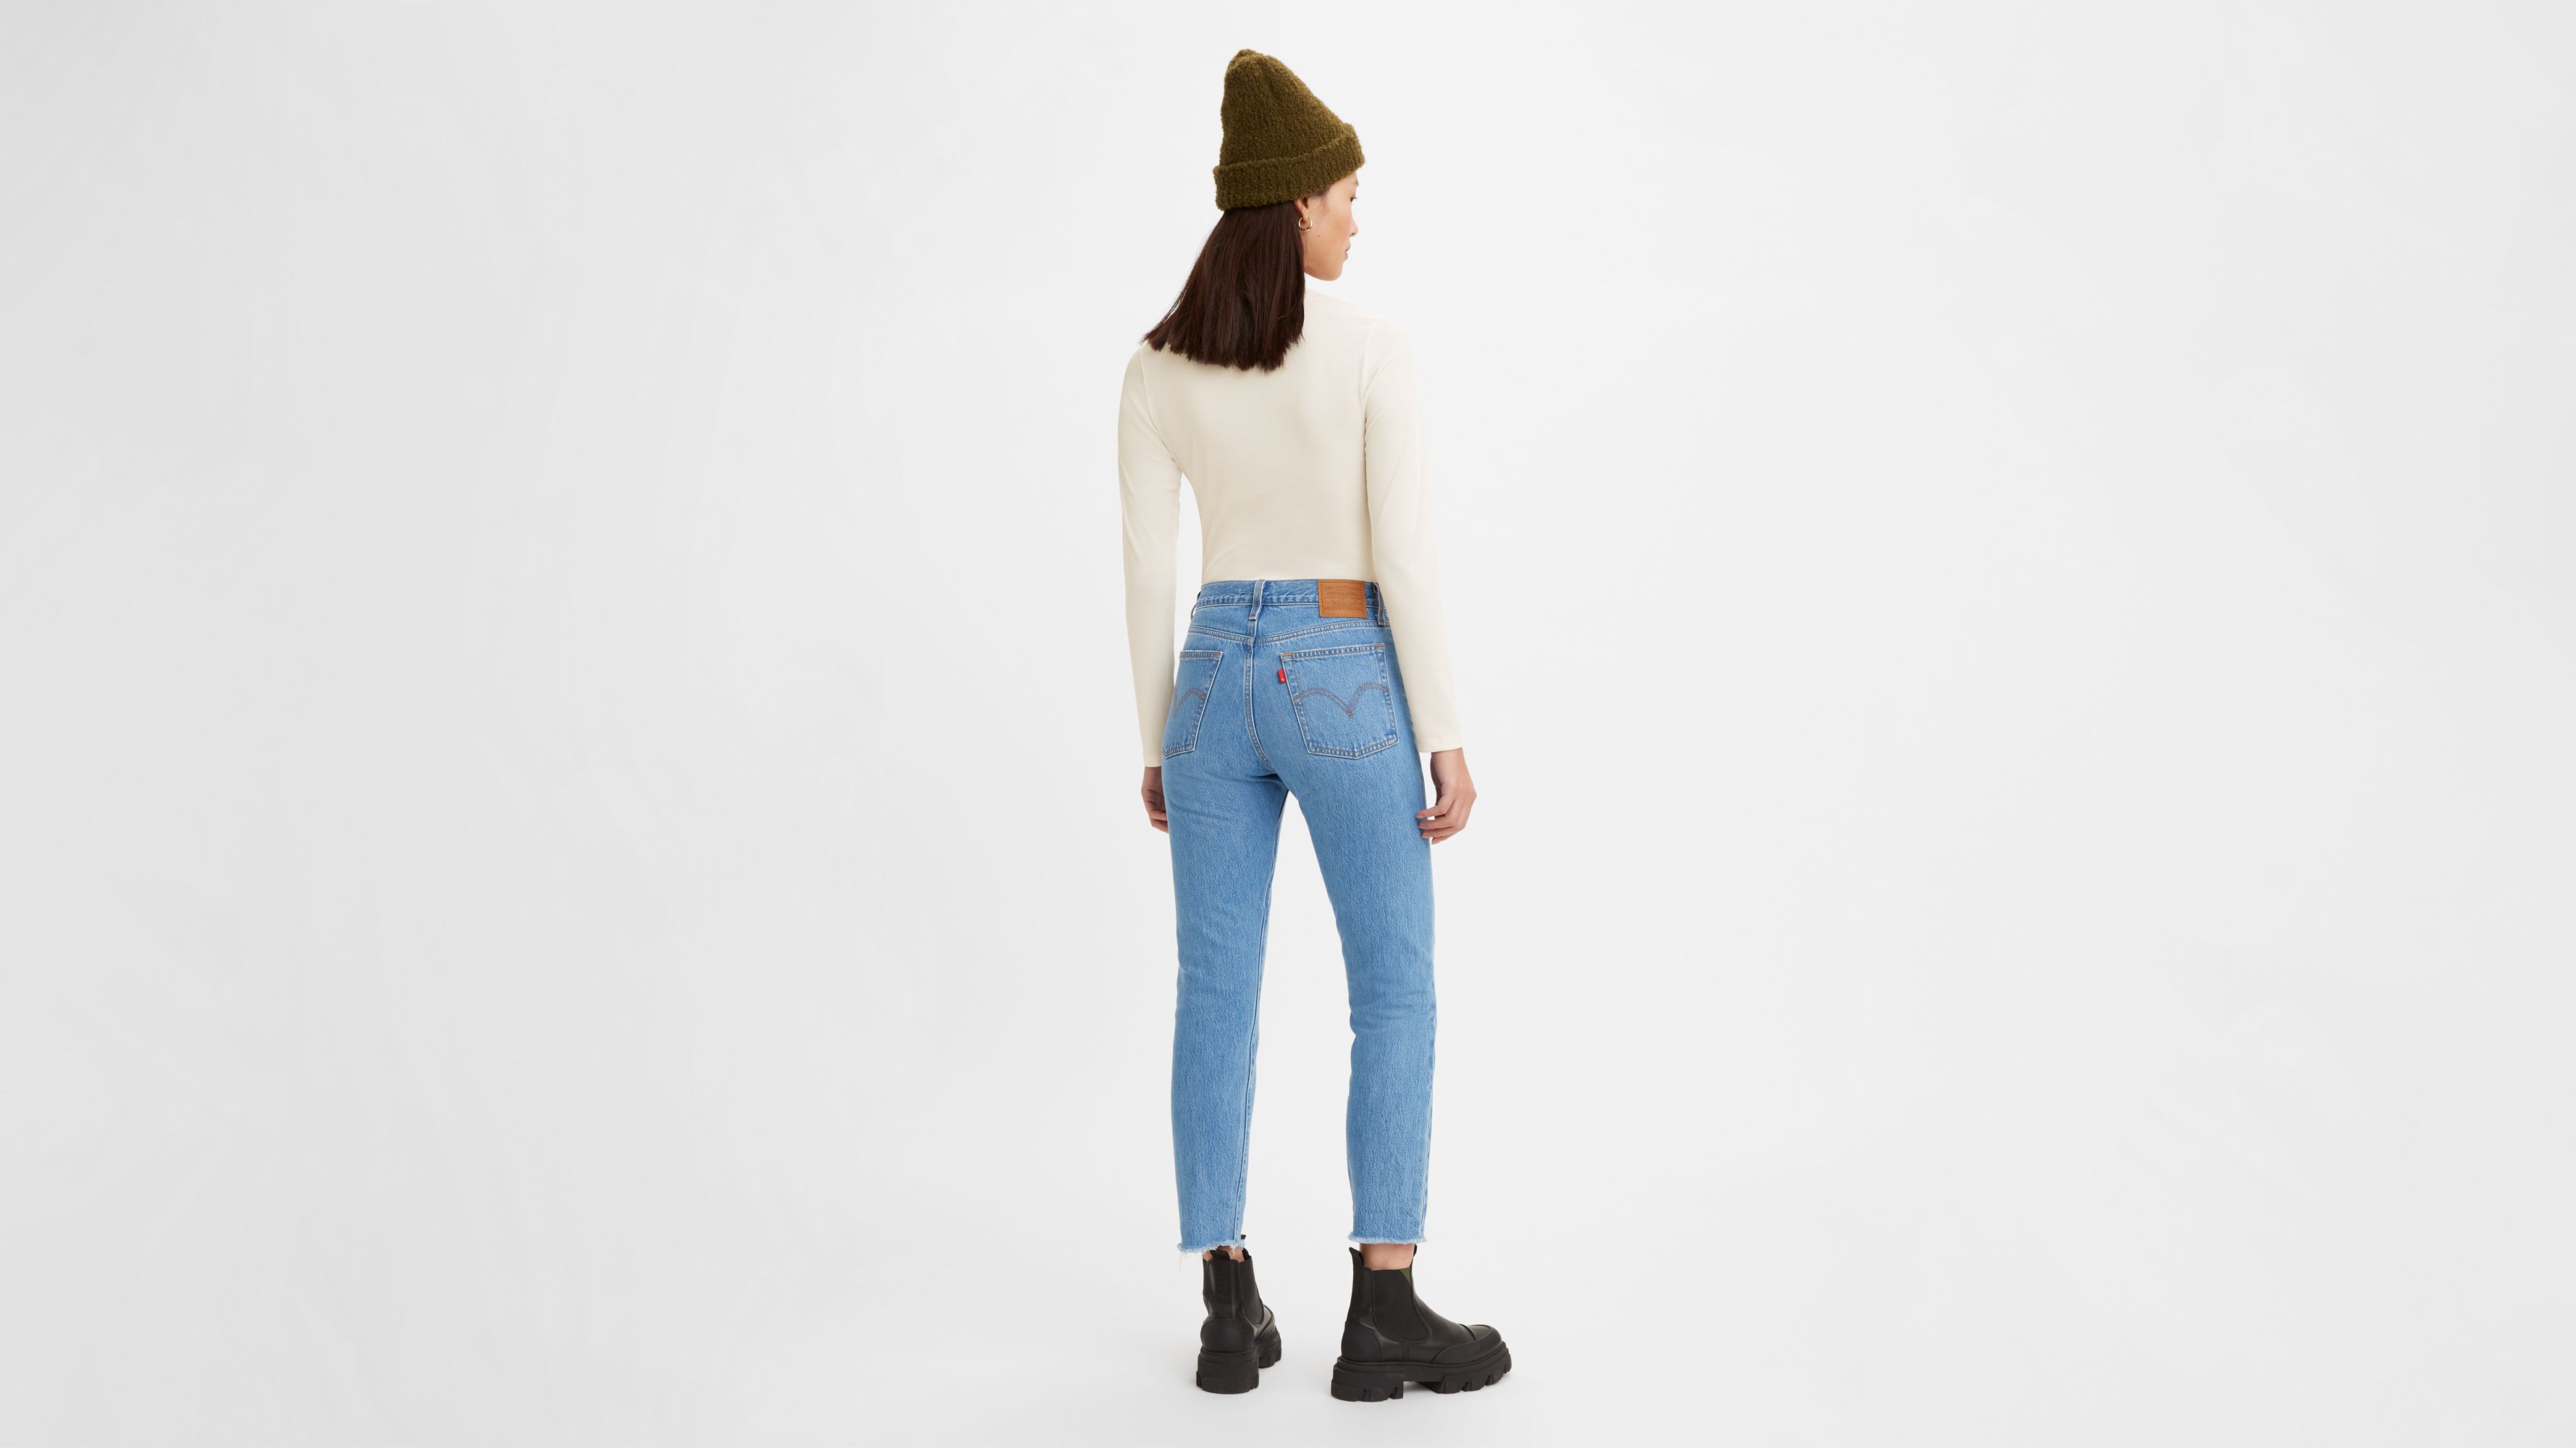 Wedgie Icon Fit Ankle Women's Jeans - Medium Wash | Levi's® US